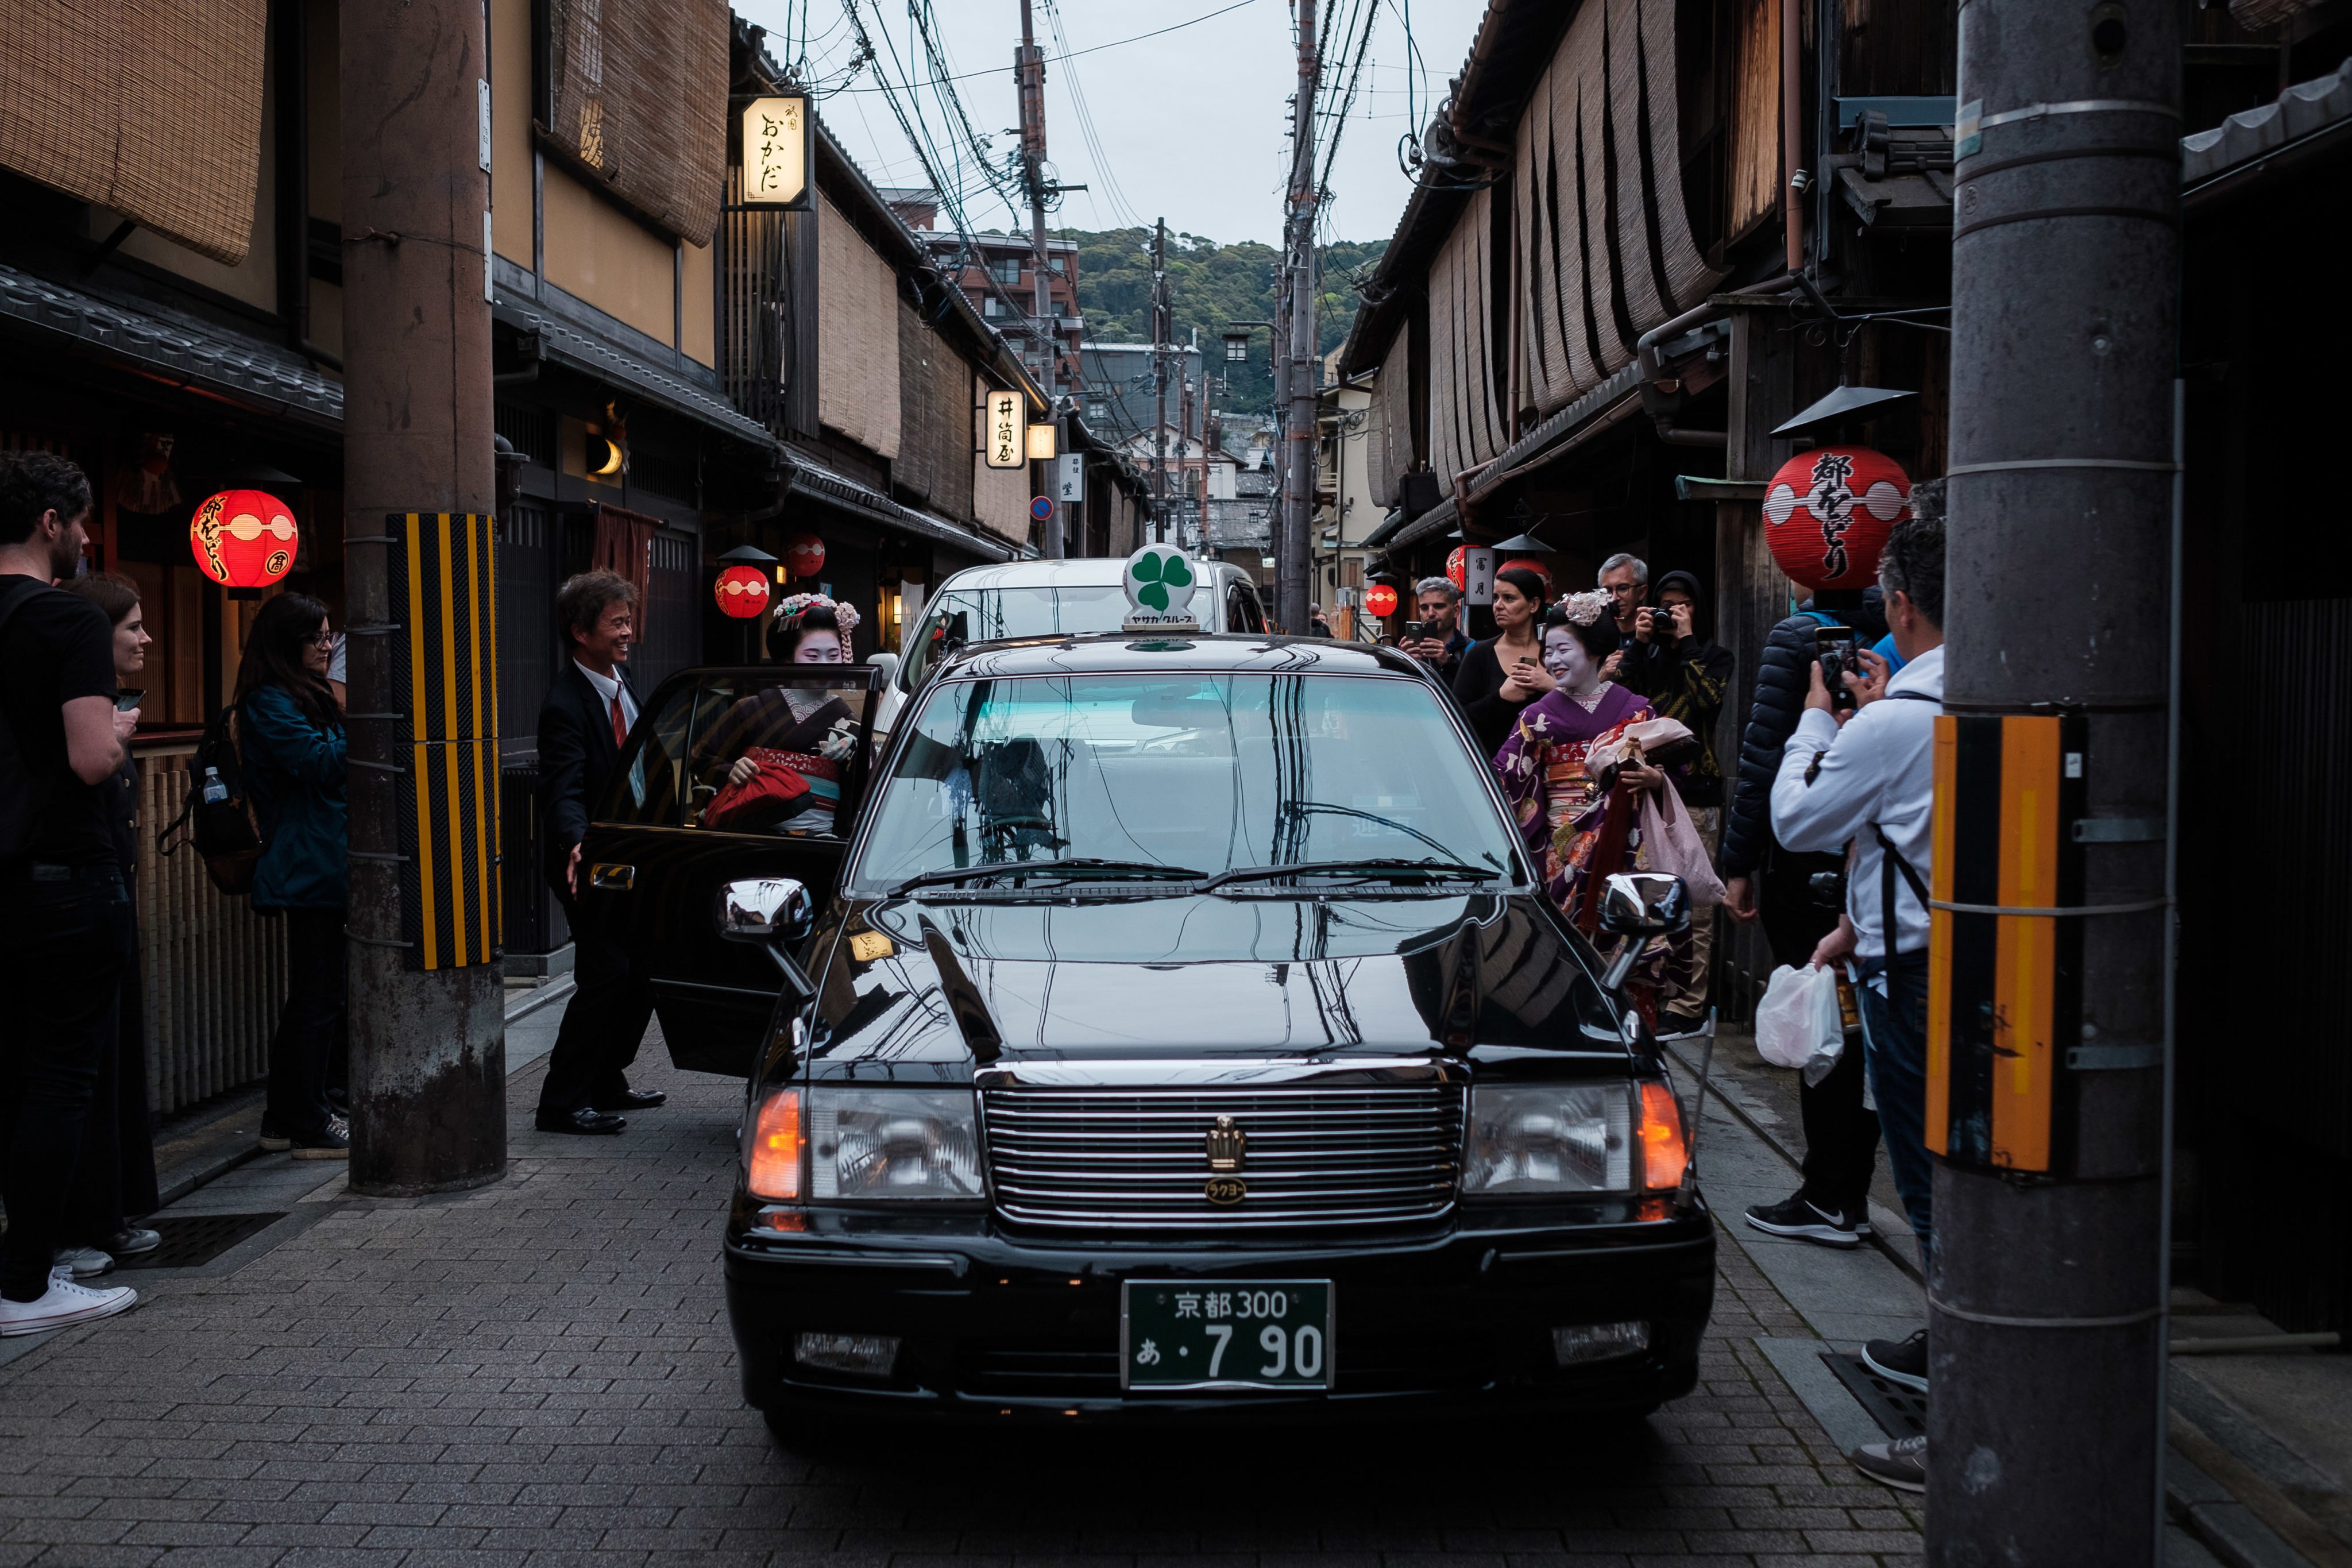 Tourists surround two maiko - apprentice geisha in Kyoto - as they get into a taxi in the Gion area in April 2019. As tourists return to Japan at almost pre-pandemic levels, the city is once again dealing with the problems of overtourism, including traffic, littering and bad behaviour. Photo: Getty Images